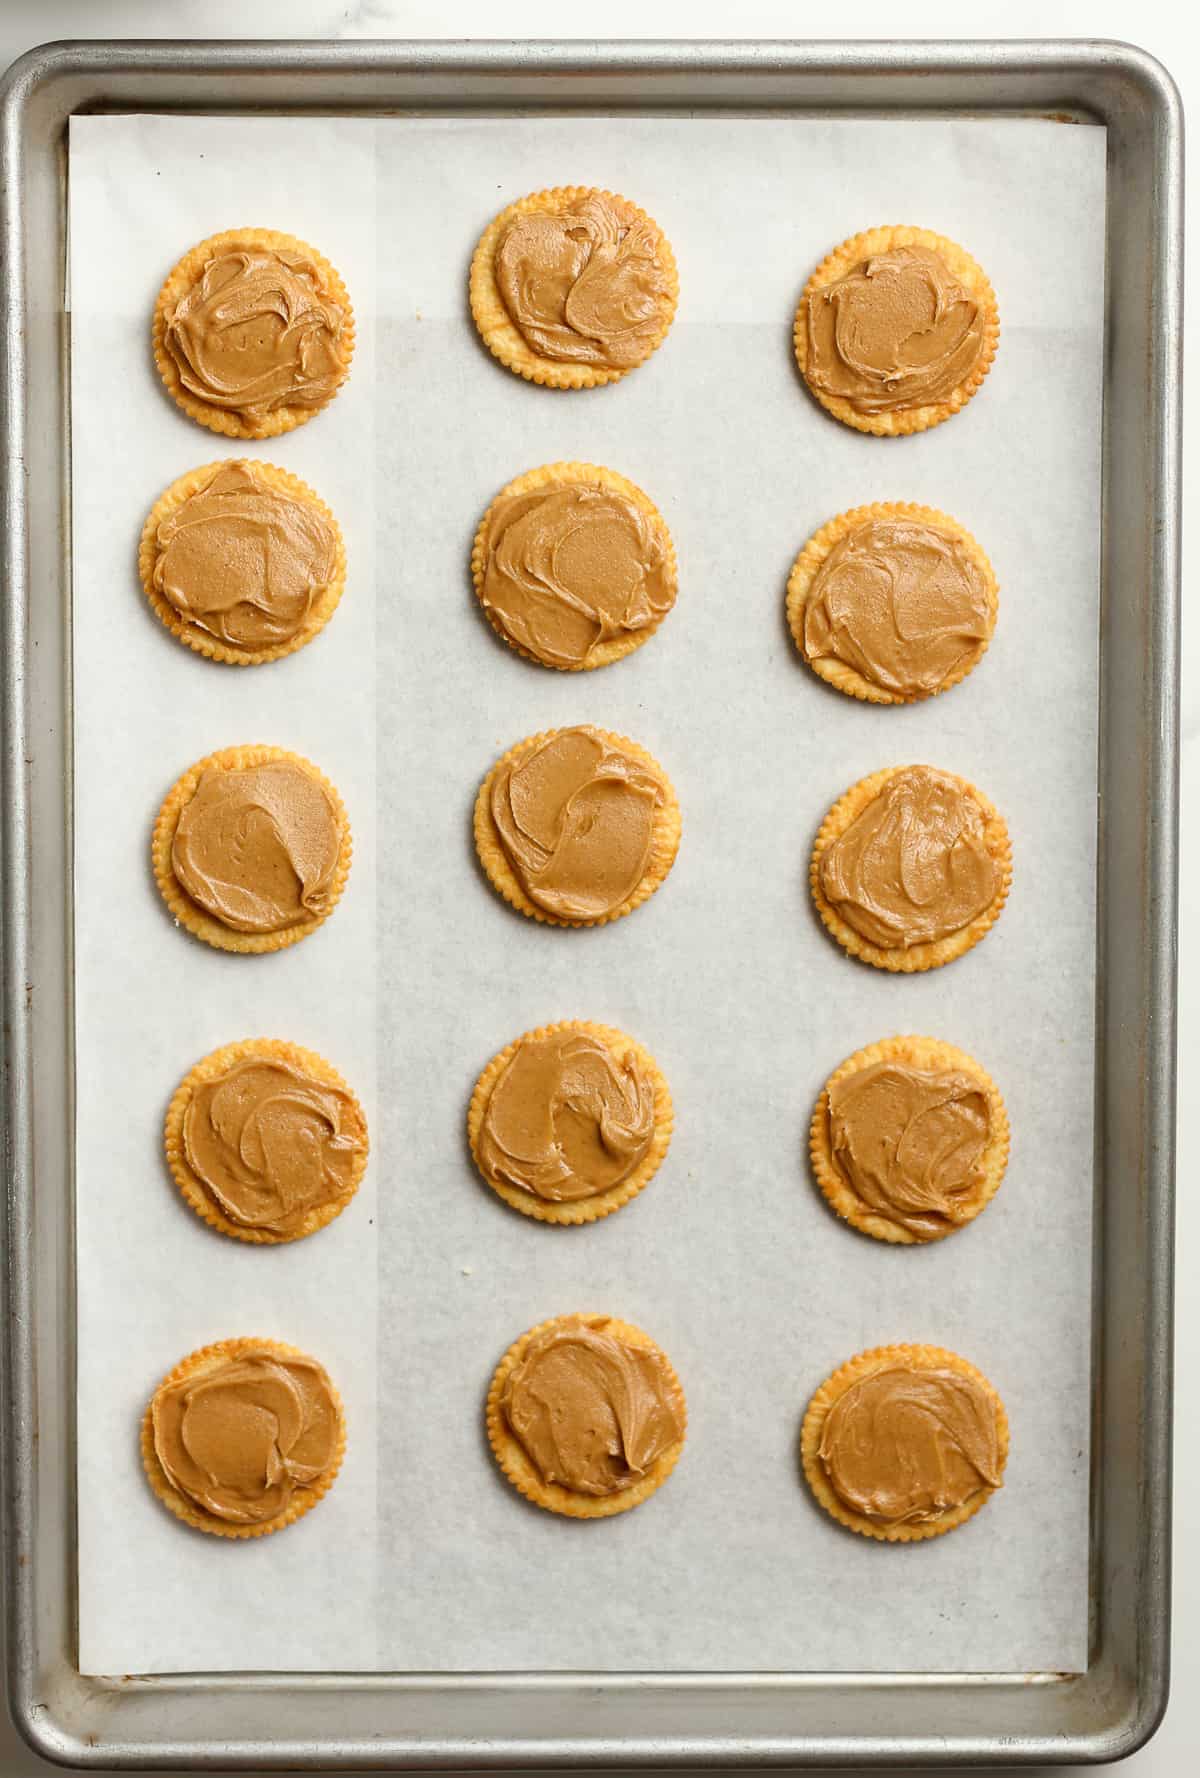 A pan with Ritz crackers and peanut butter on top.